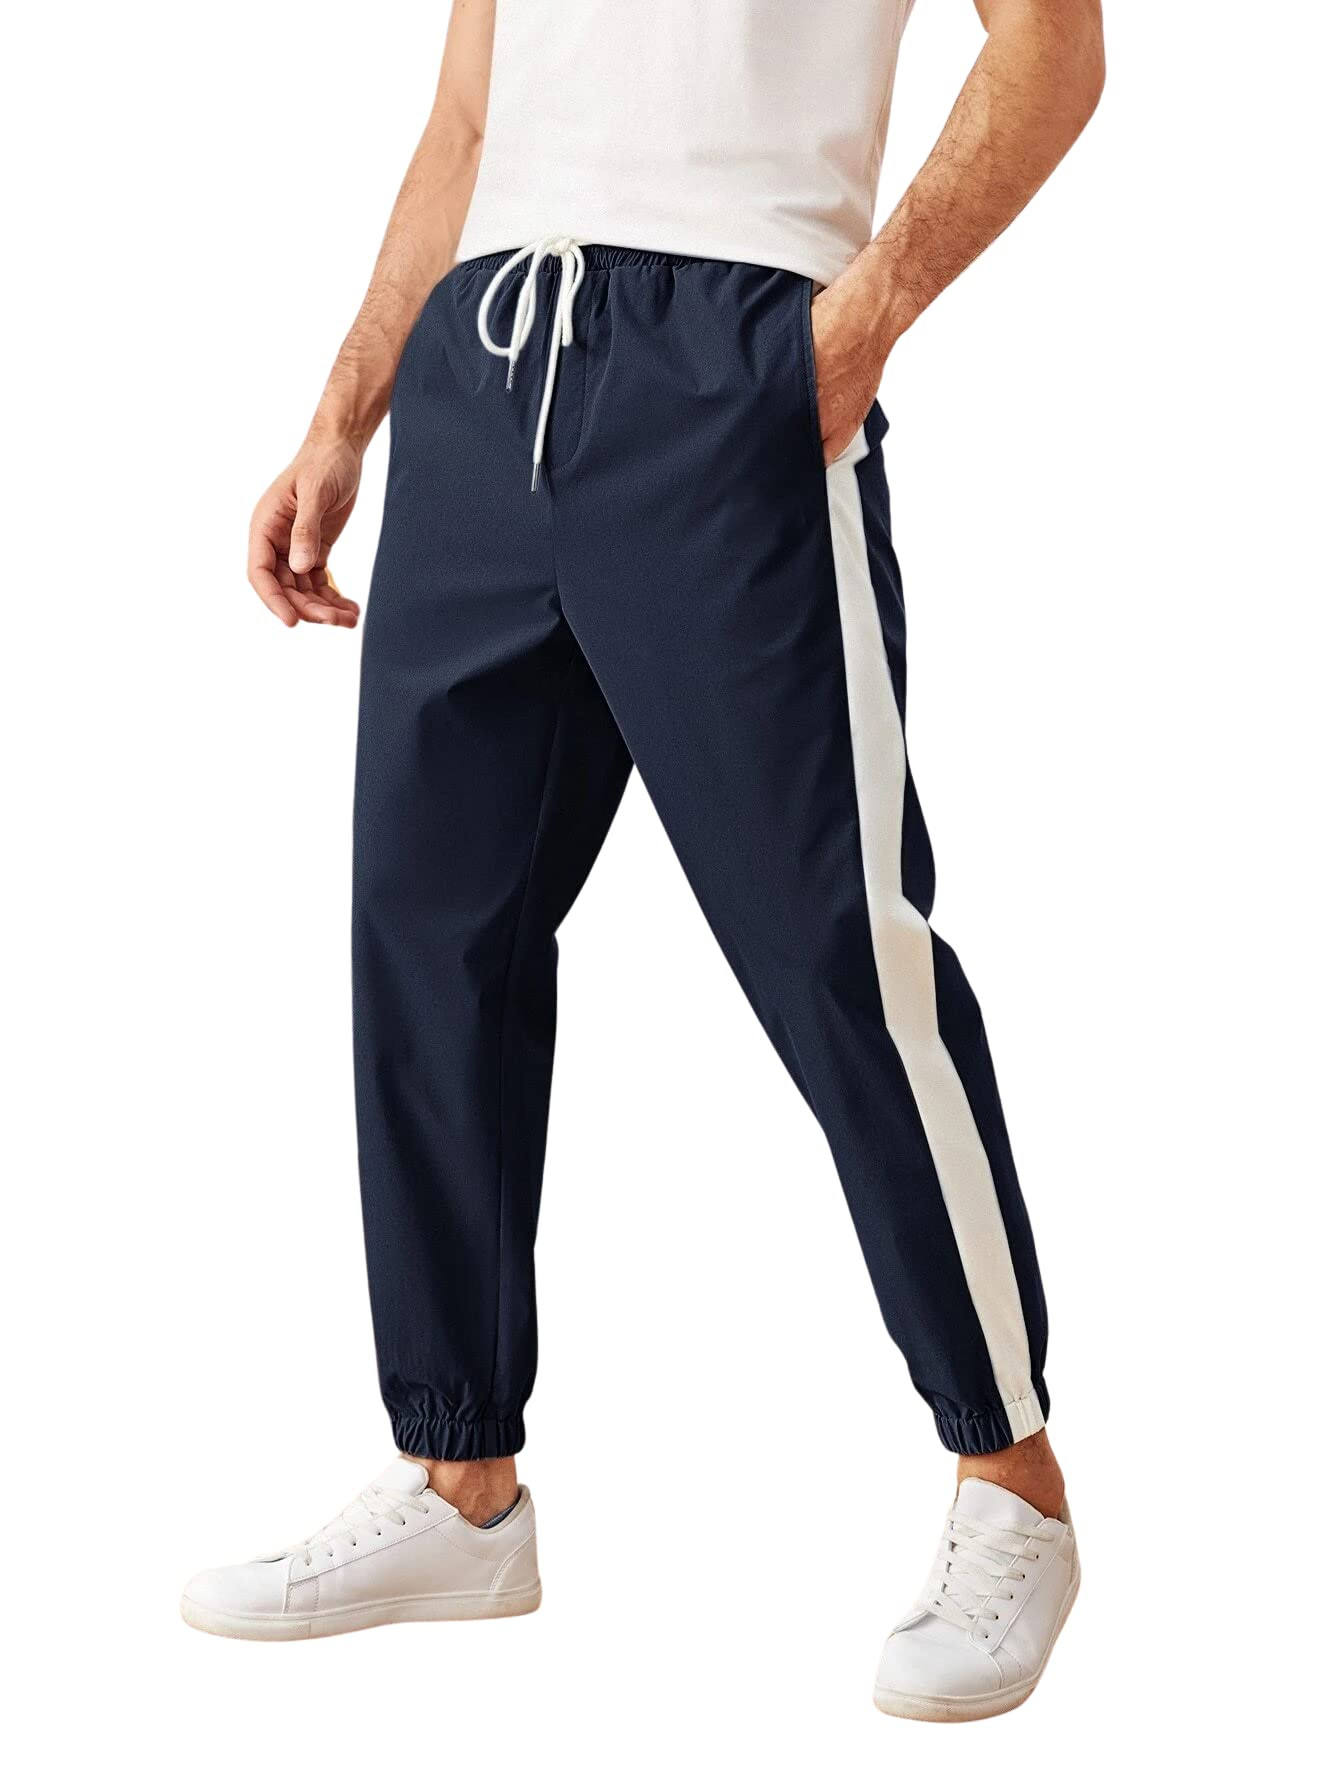 Custom Design Skinny Sweatpants Trousers Fashion Fitness Gym Pants Men -  China Yoga Pant and Baby Diaper Pant price | Made-in-China.com